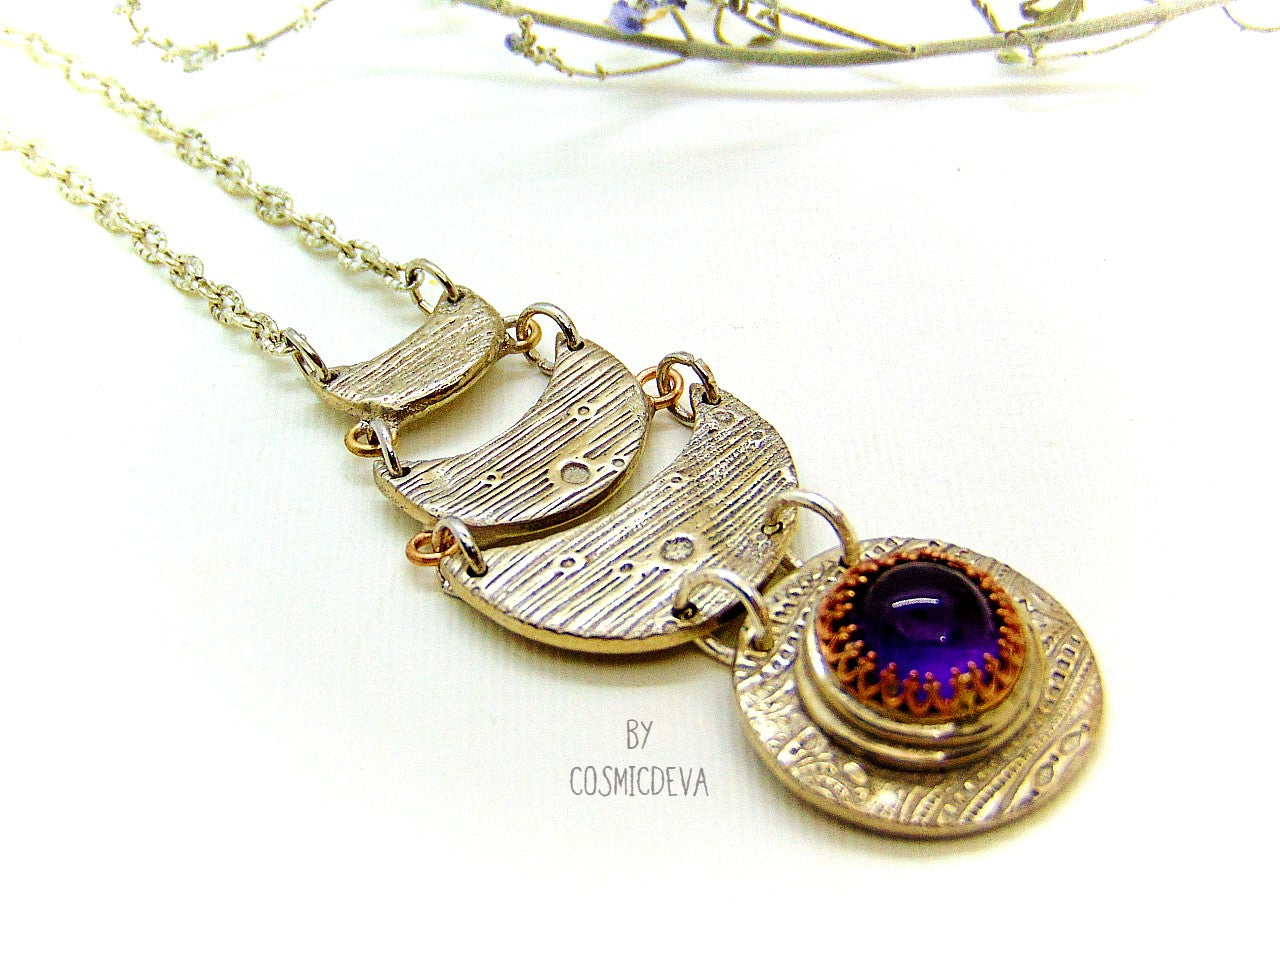 Beautiful purple silver moon phase necklace with a natural amethyst cabochon as a focal point. This silver bronze crescent moon pendant was completely hand formed and kiln fired. Silver bronze has the look of sterling silver but for a more affordable price. The moon pendant suspends from an 18 inch – 20-inch-long chain.